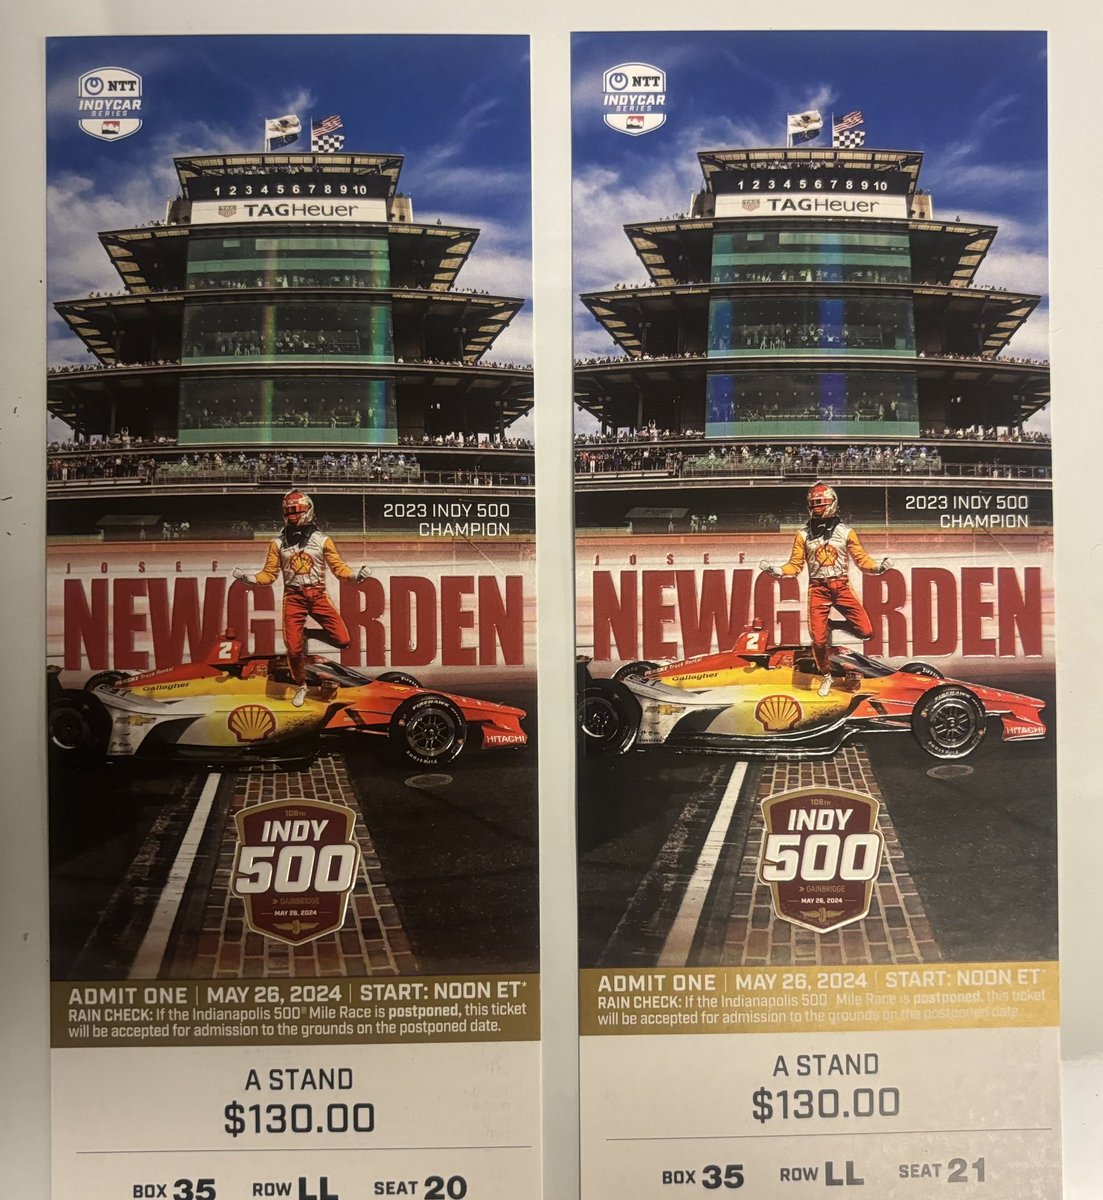 Hey folks - I don’t like to do this but we’ve had a last minute cancellation that leaves me with 2 tickets to the Indy 500 Sunday.

Tickets are excellent seats near the end of the homestretch with a view of the pits and Turn 1. The best part? They’re in the shade!

$260 for the